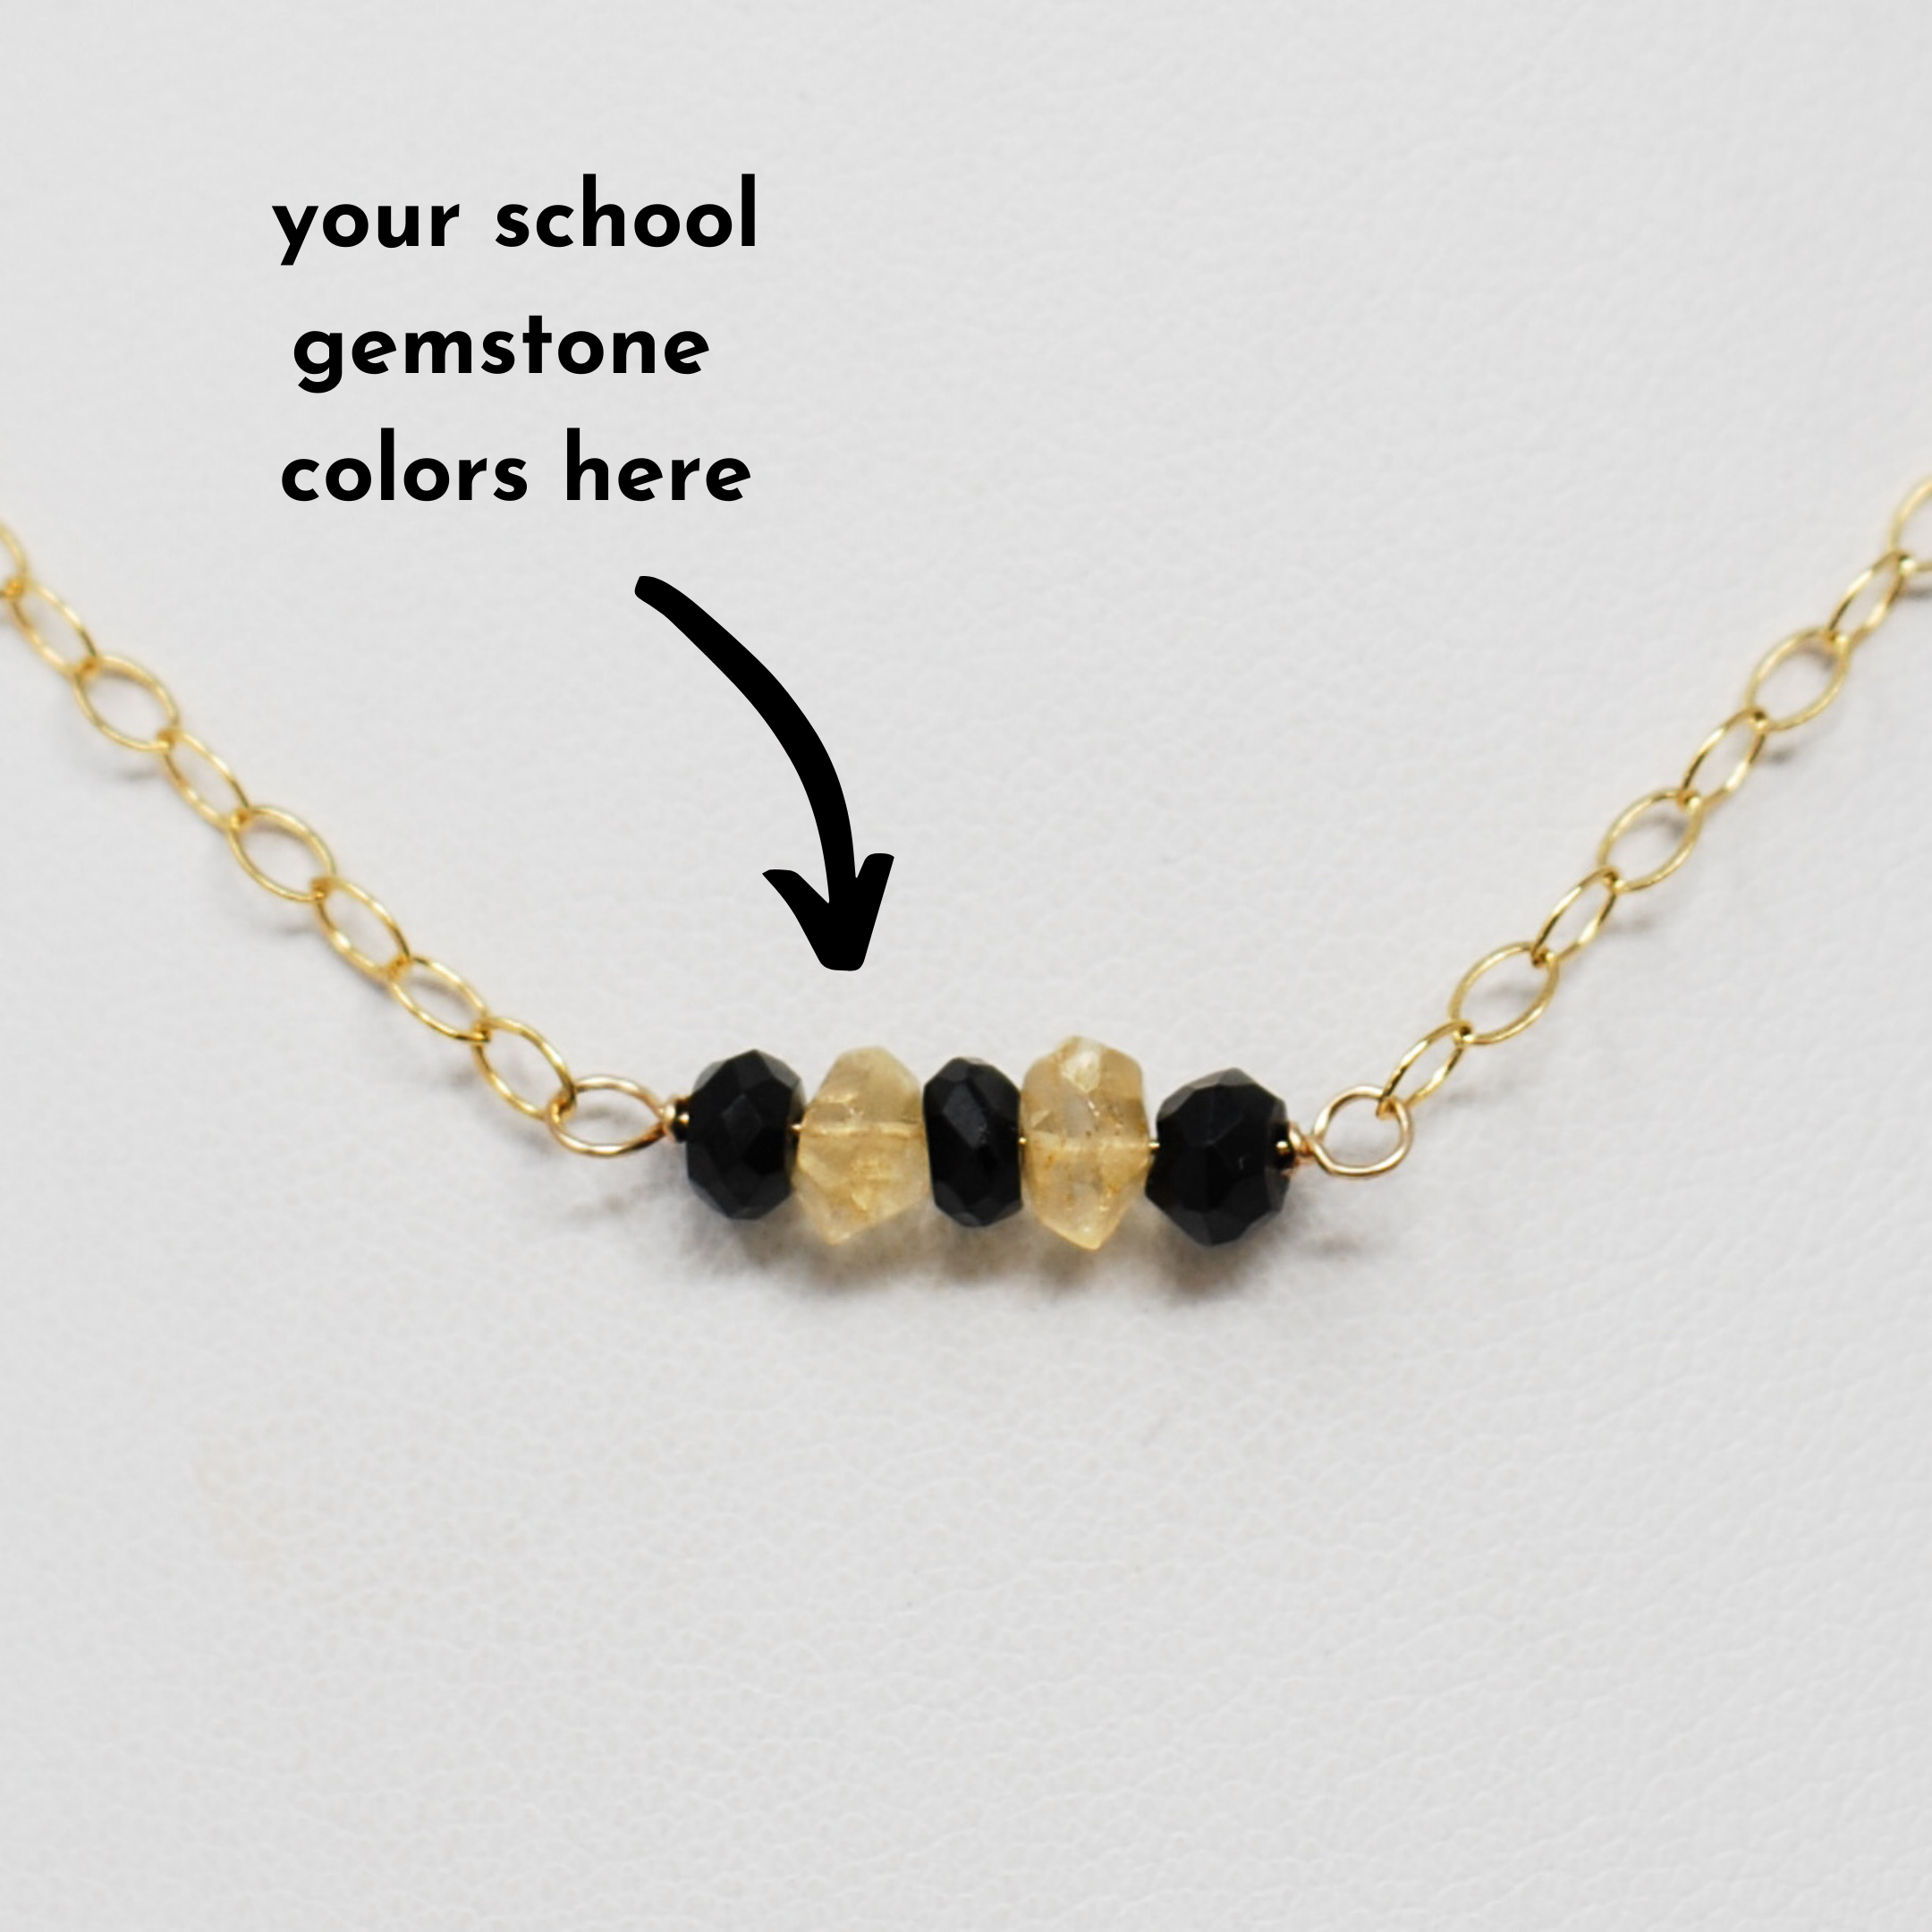 14k Gold Filled "College Colors" Necklace